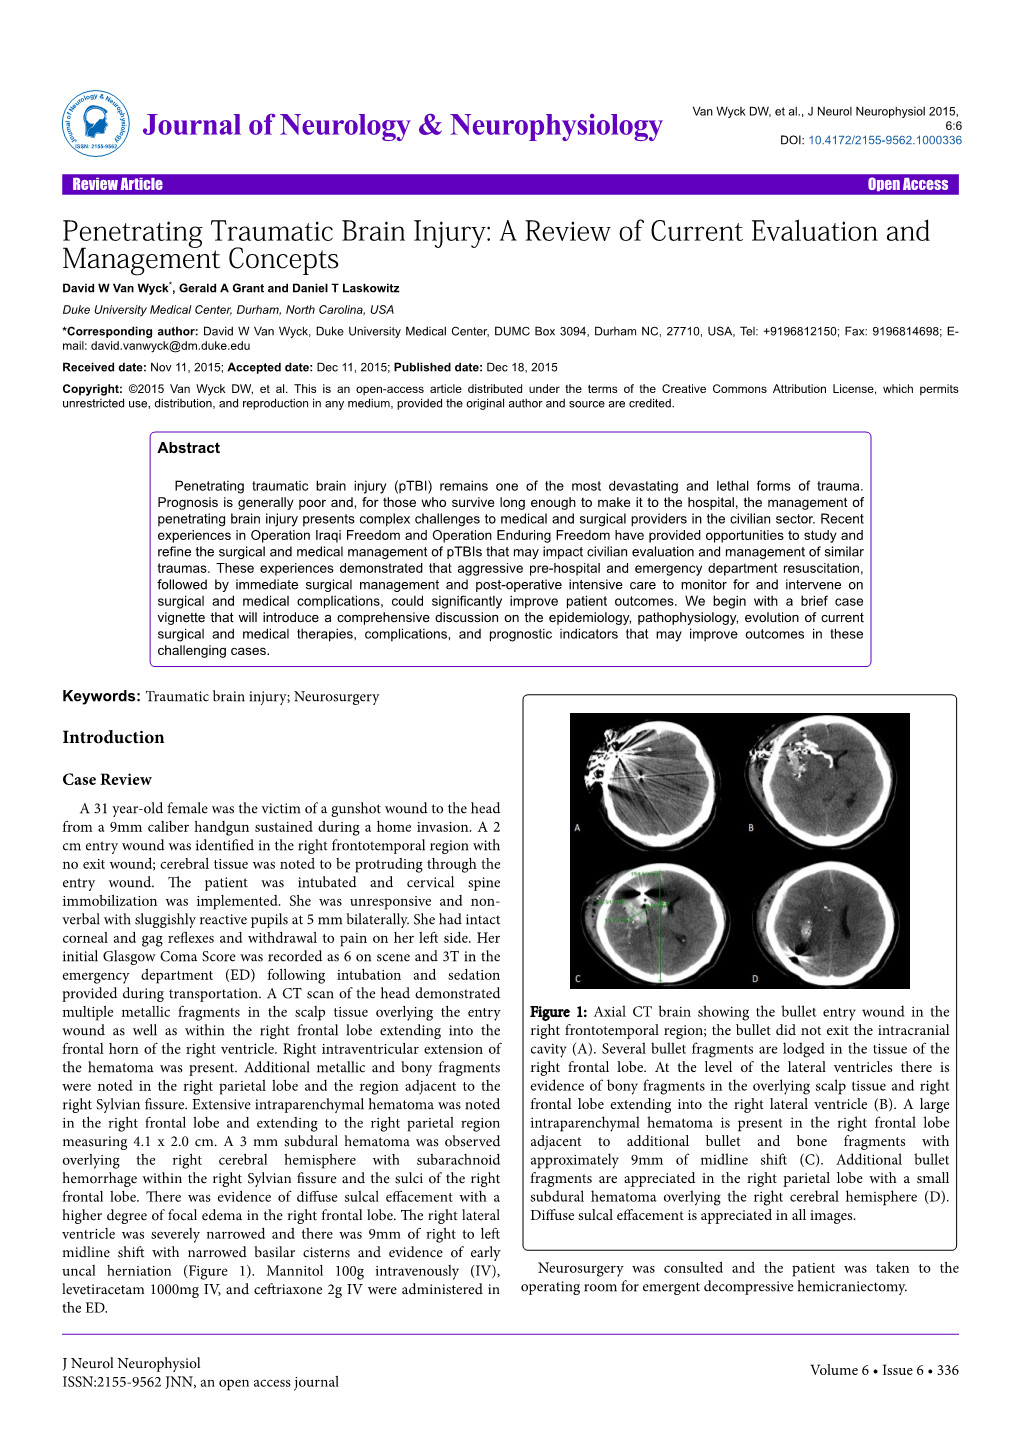 Penetrating Traumatic Brain Injury: a Review of Current Evaluation And